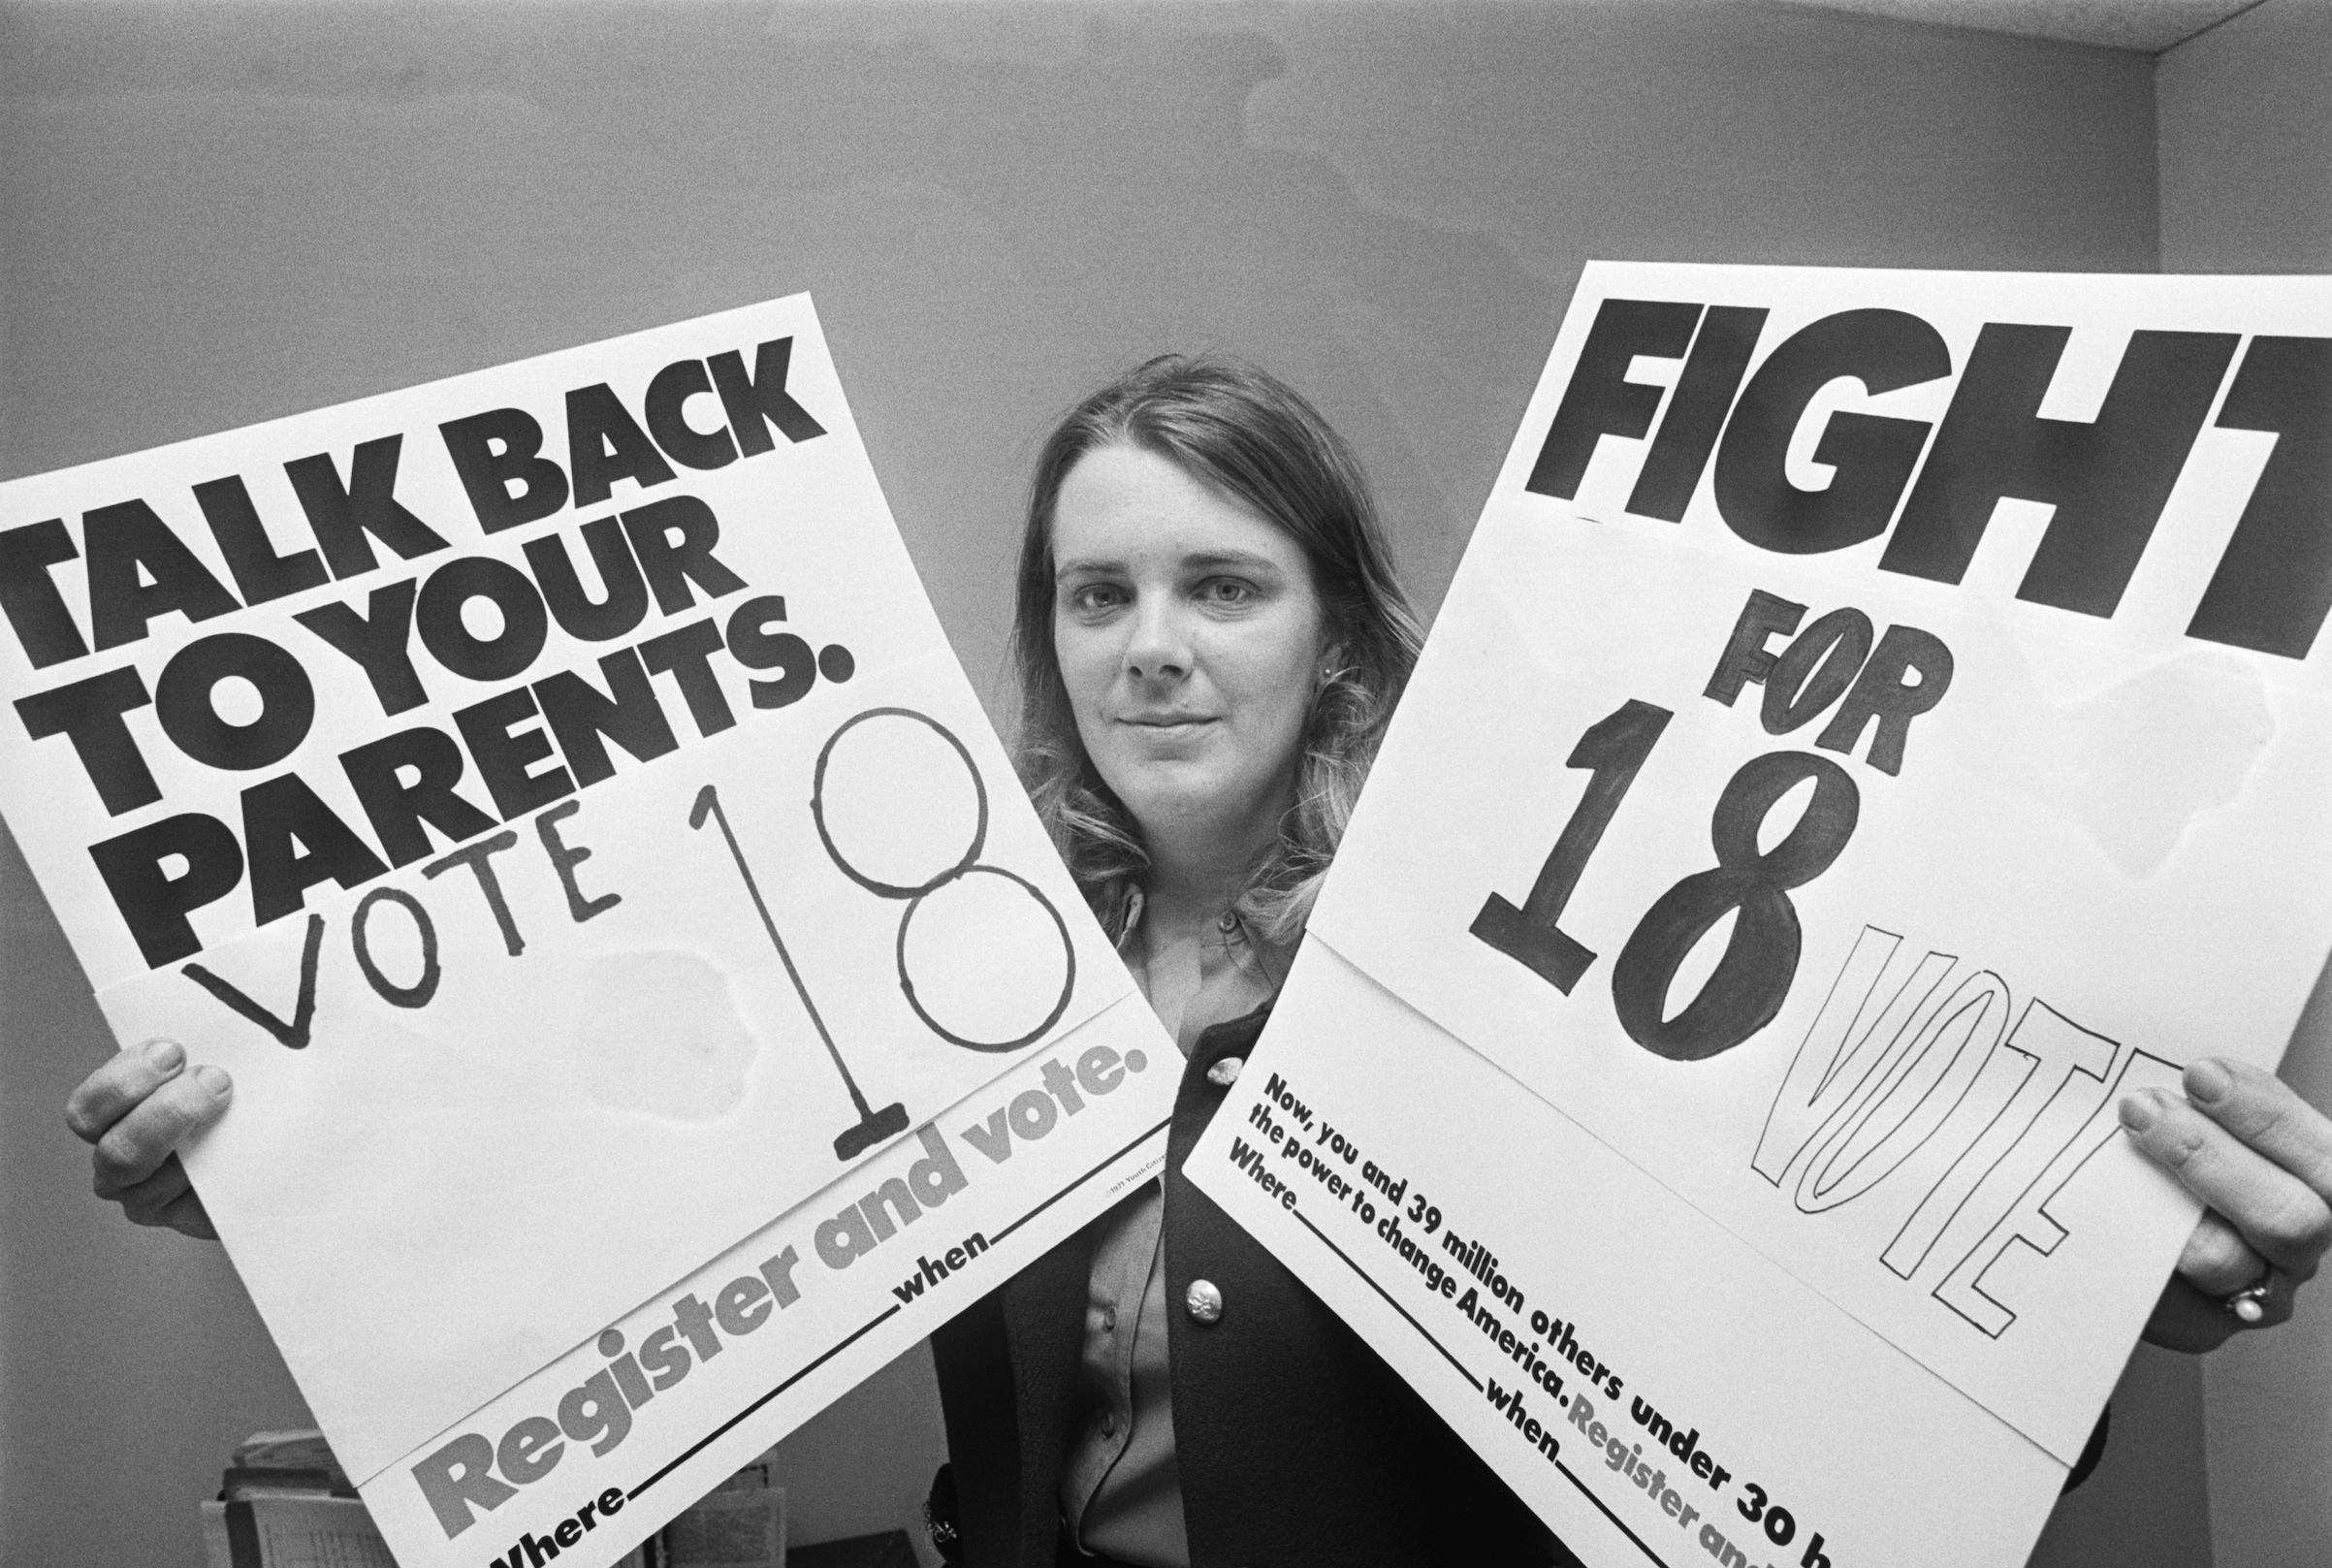 Patricia Keefer at her office in Washington, D.C. in 1971, holding up placards urging 18-year-olds (who have just received to right to vote) to use their power and vote. (Bettmann / Getty Images)